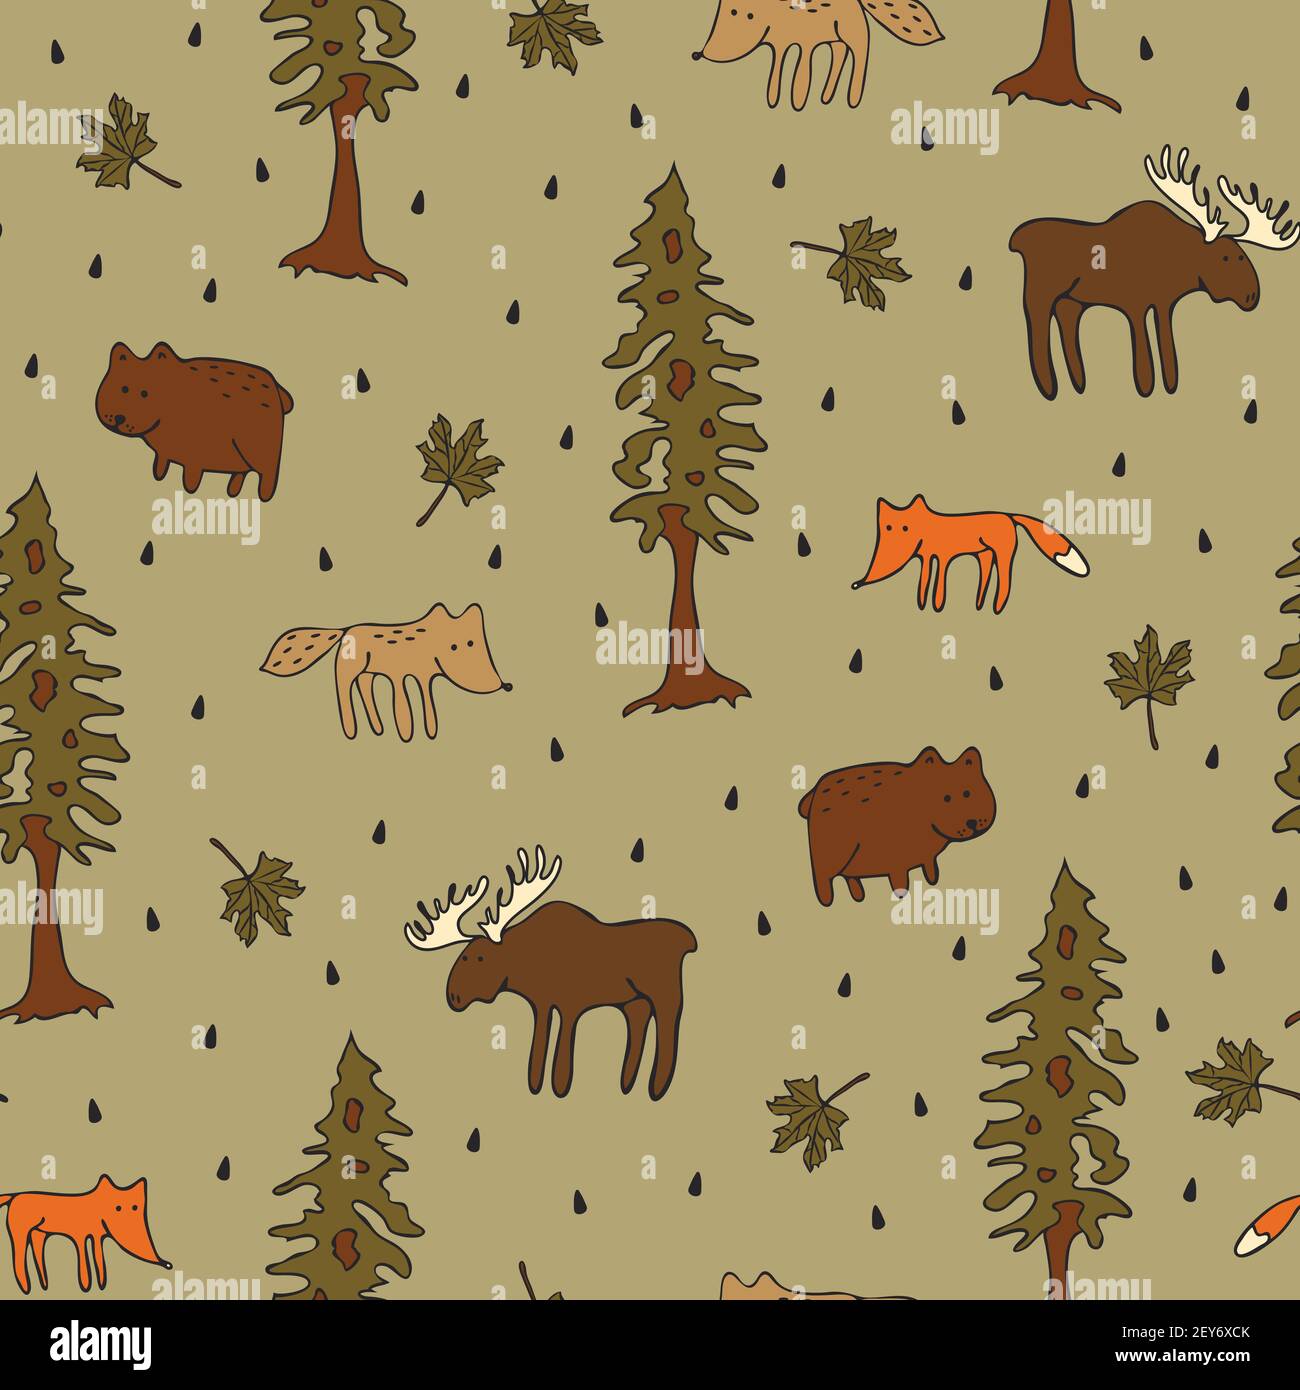 Seamless vector pattern with forest animals on grey background. Cute wildlife wallpaper design for children. Fashion fabric style. Stock Vector